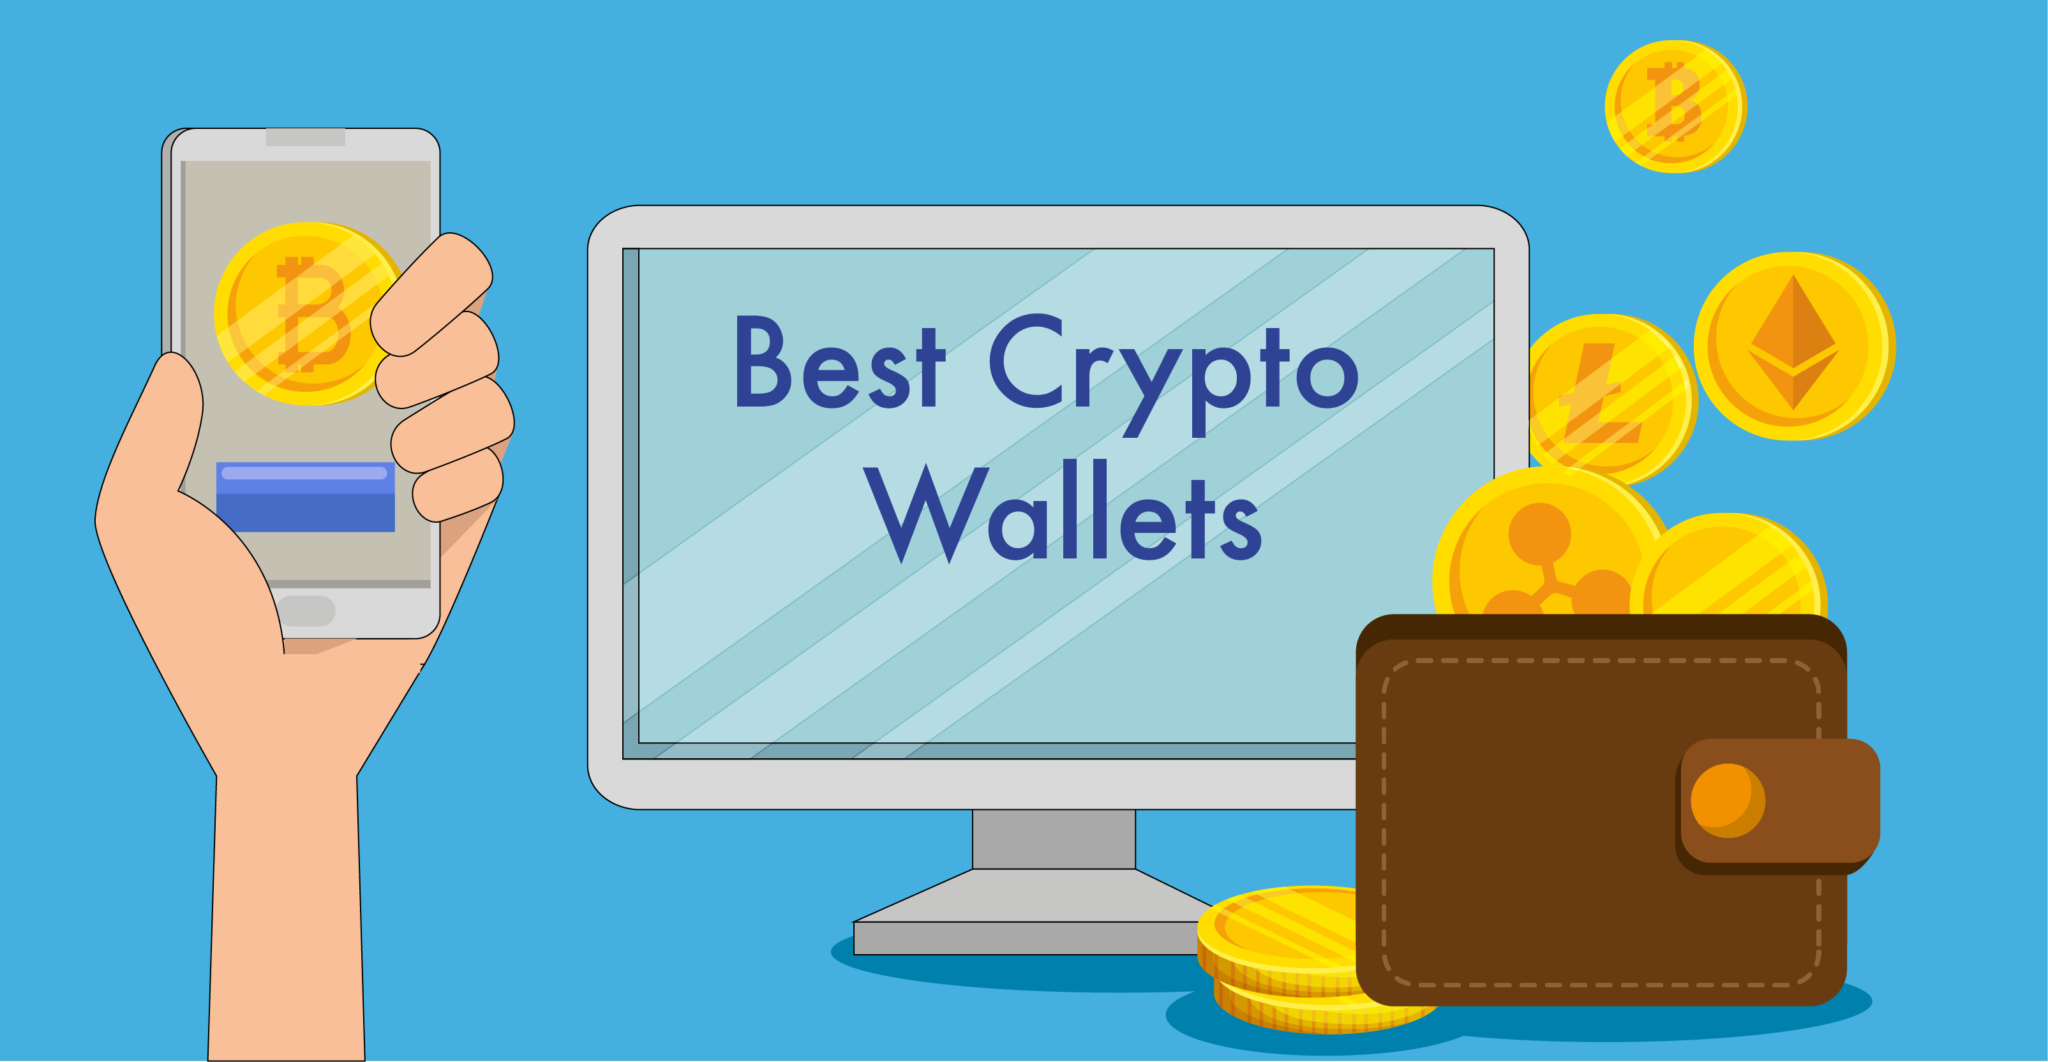 Best Crypto Wallets for The Top Coins